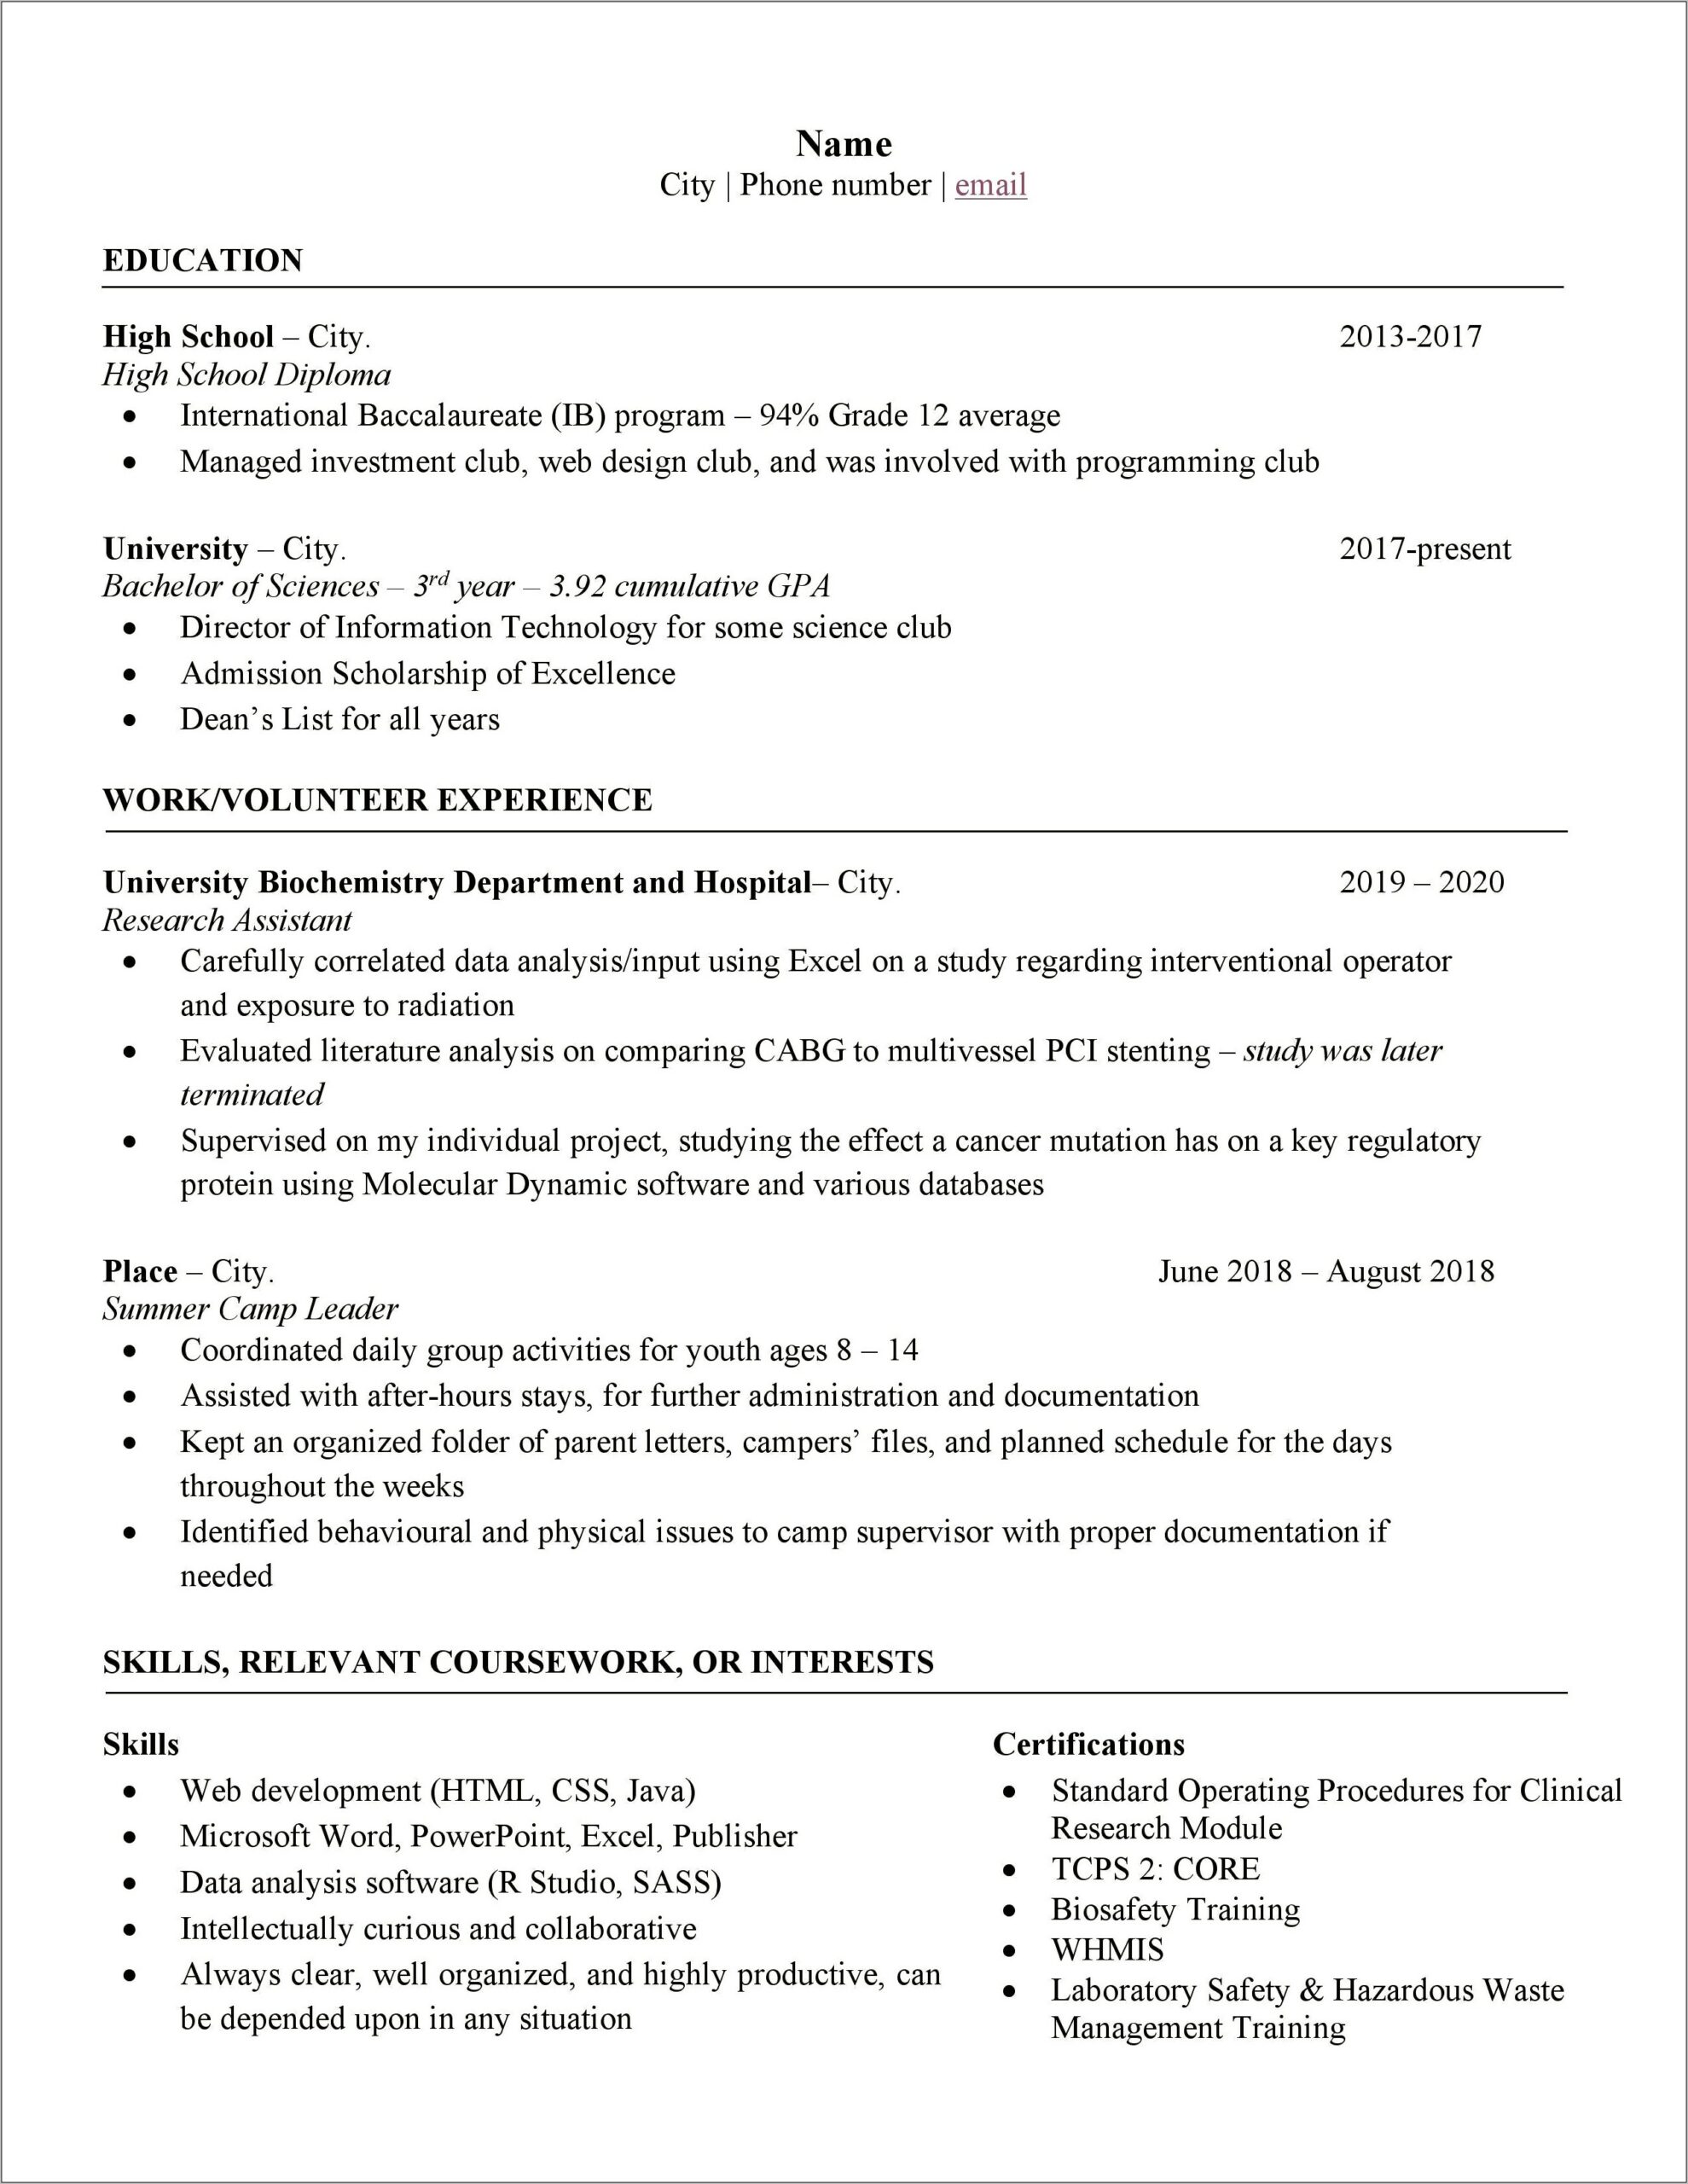 Put Planned Courses On Resume Student